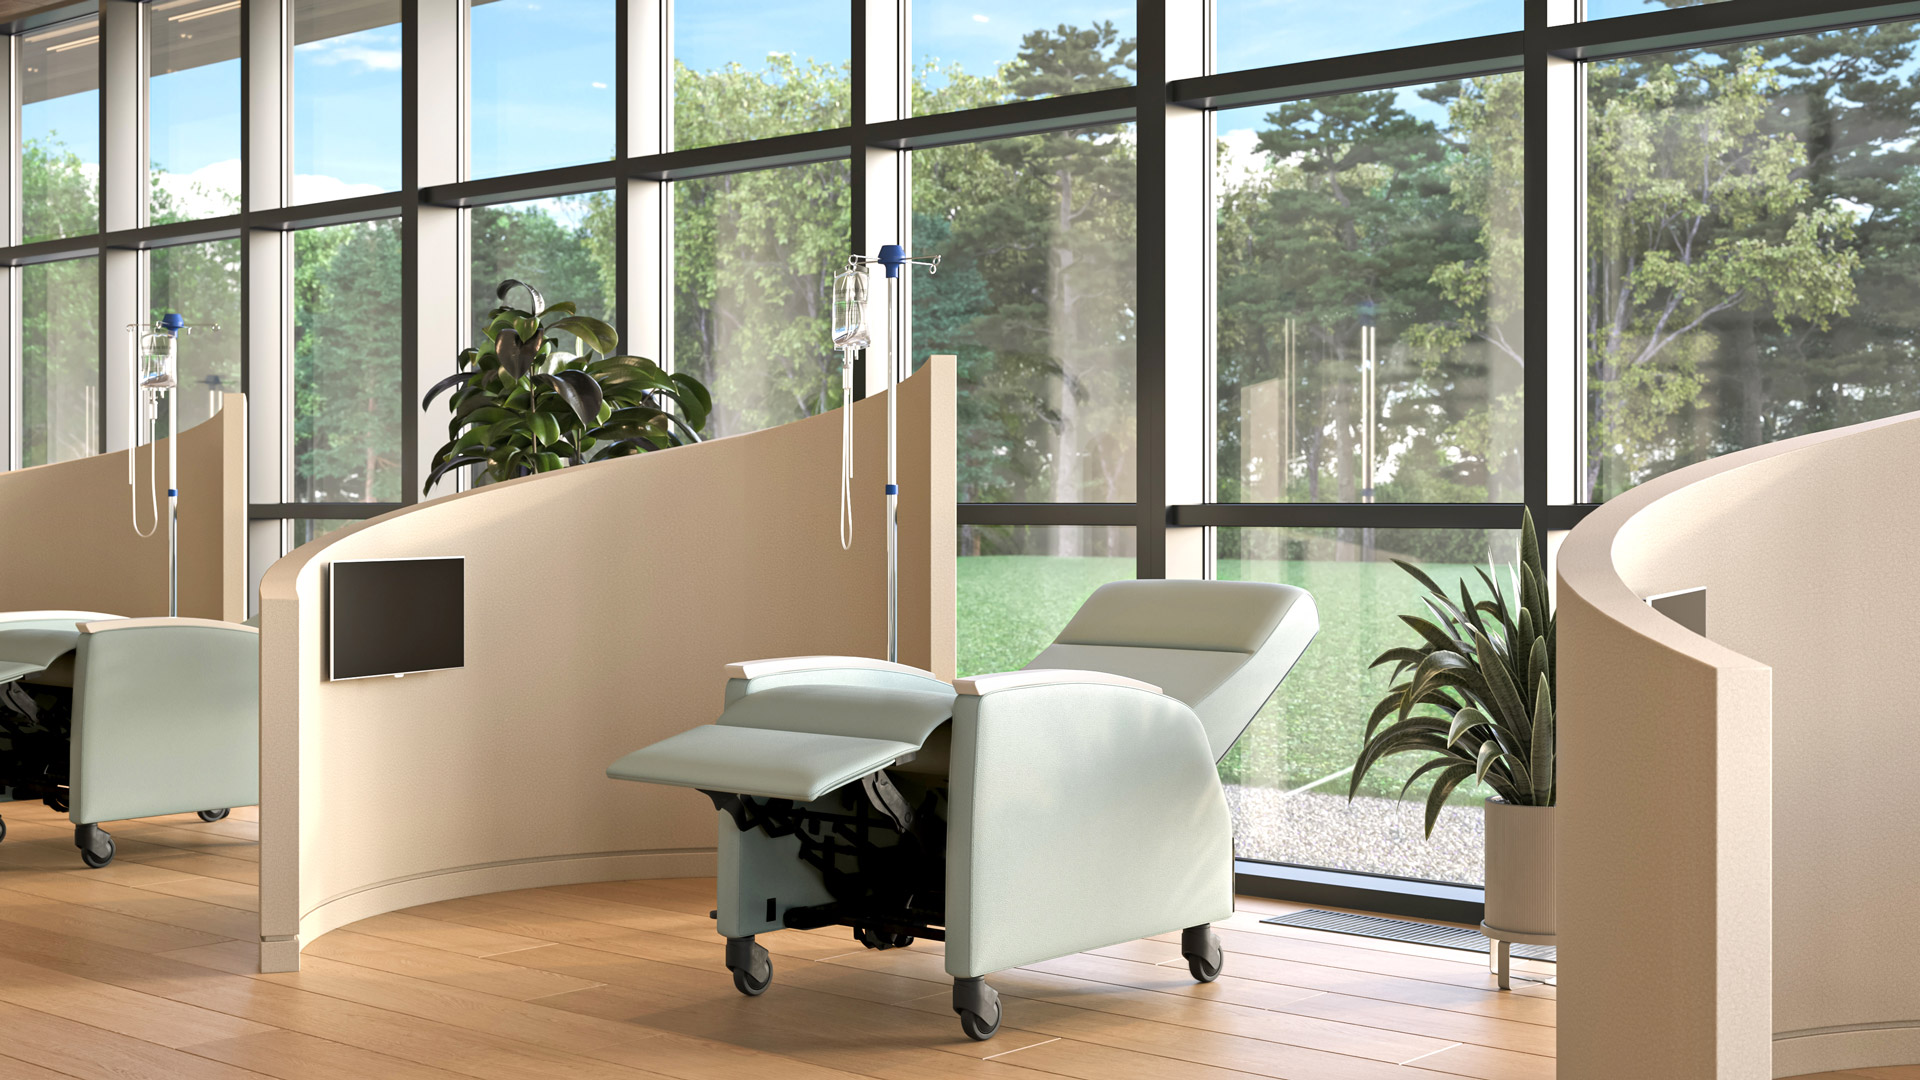 3 Tips for Designing Ergonomic and Welcoming Healthcare Facilities